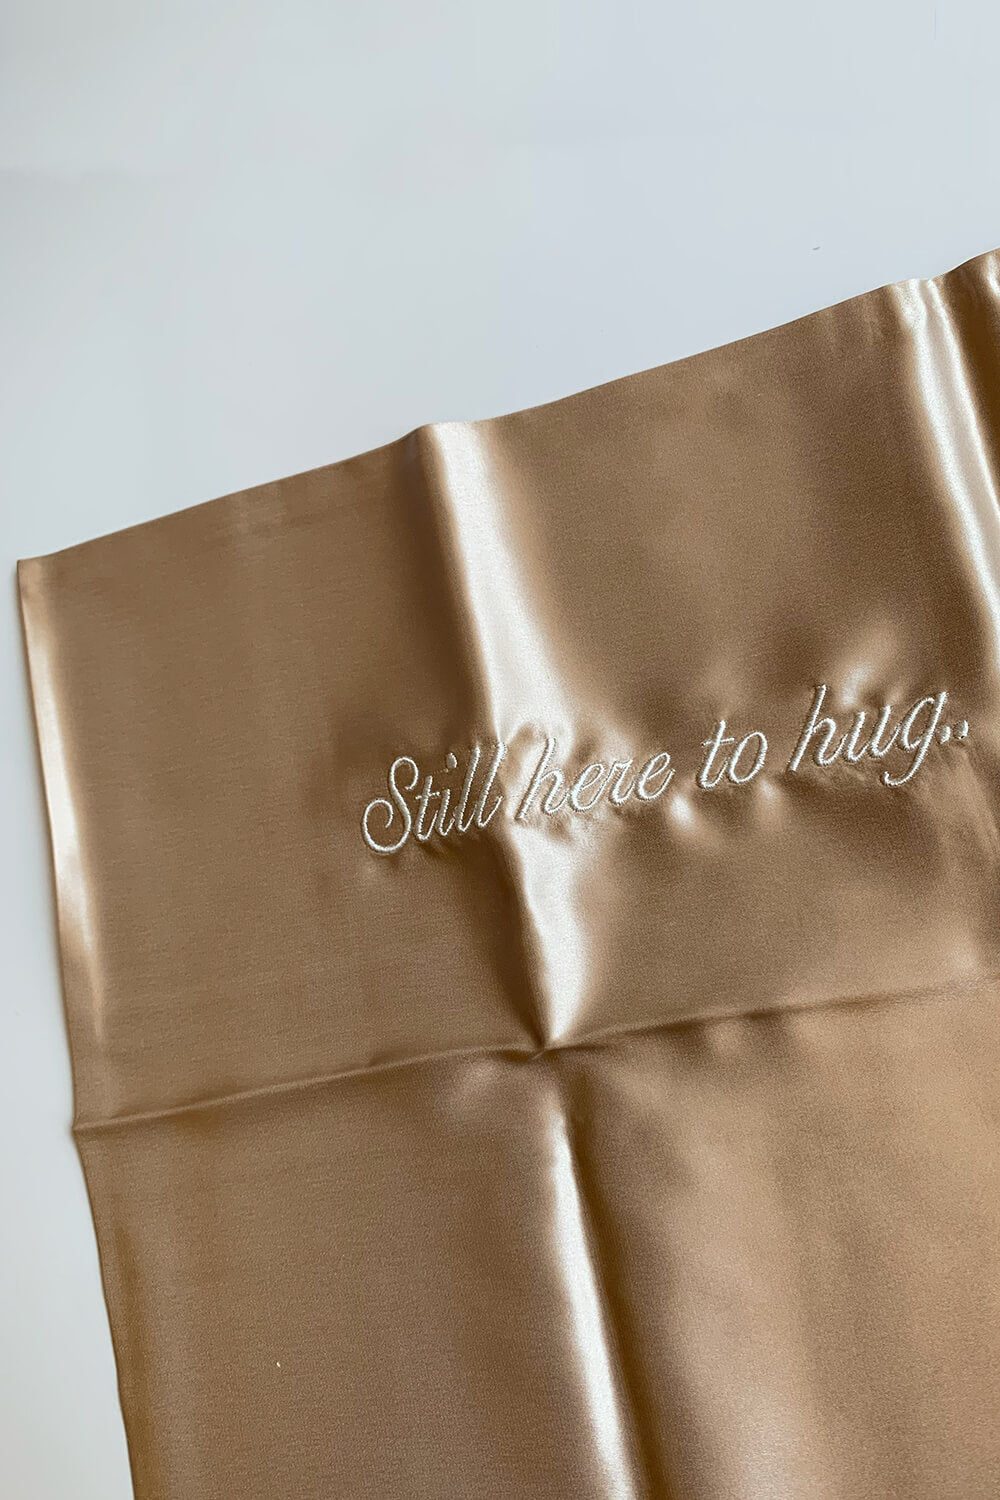 Personalised Silk Pillowcase with an embroidery (Add-On Services) - BASK™